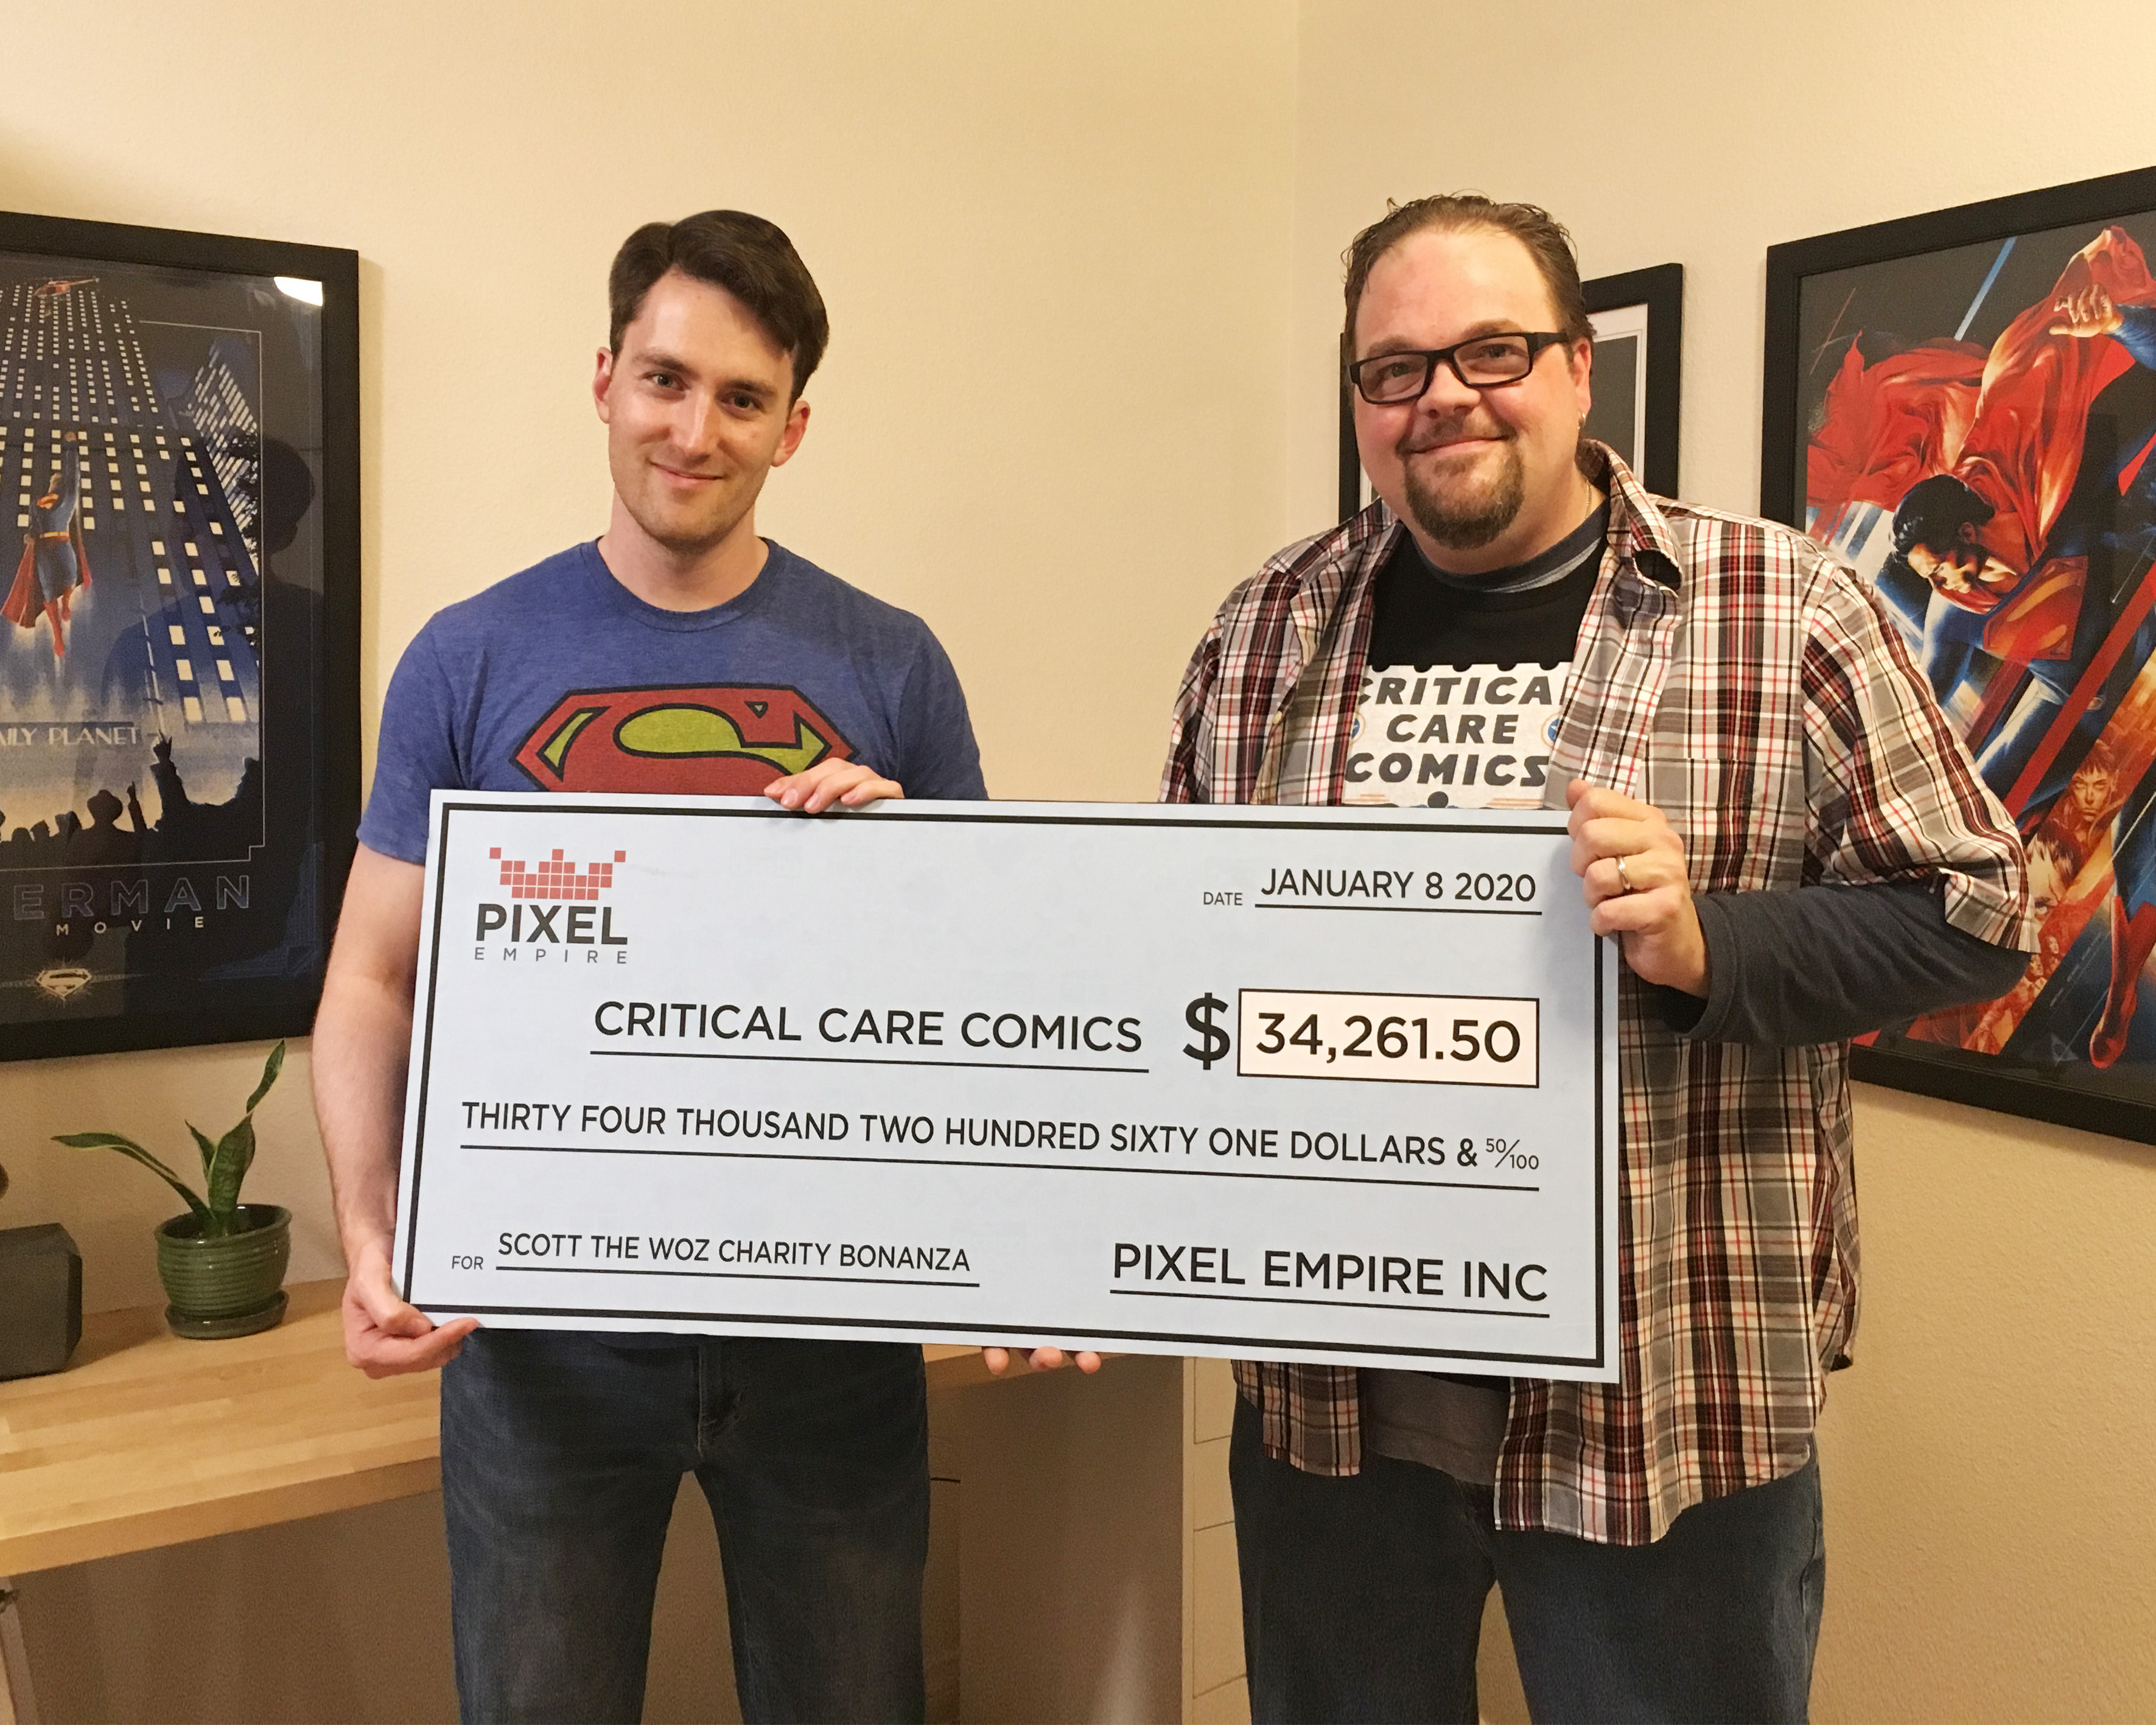 Pixel Empire Dylan West and Scott the Woz Presenting Check to Critical Care Comics